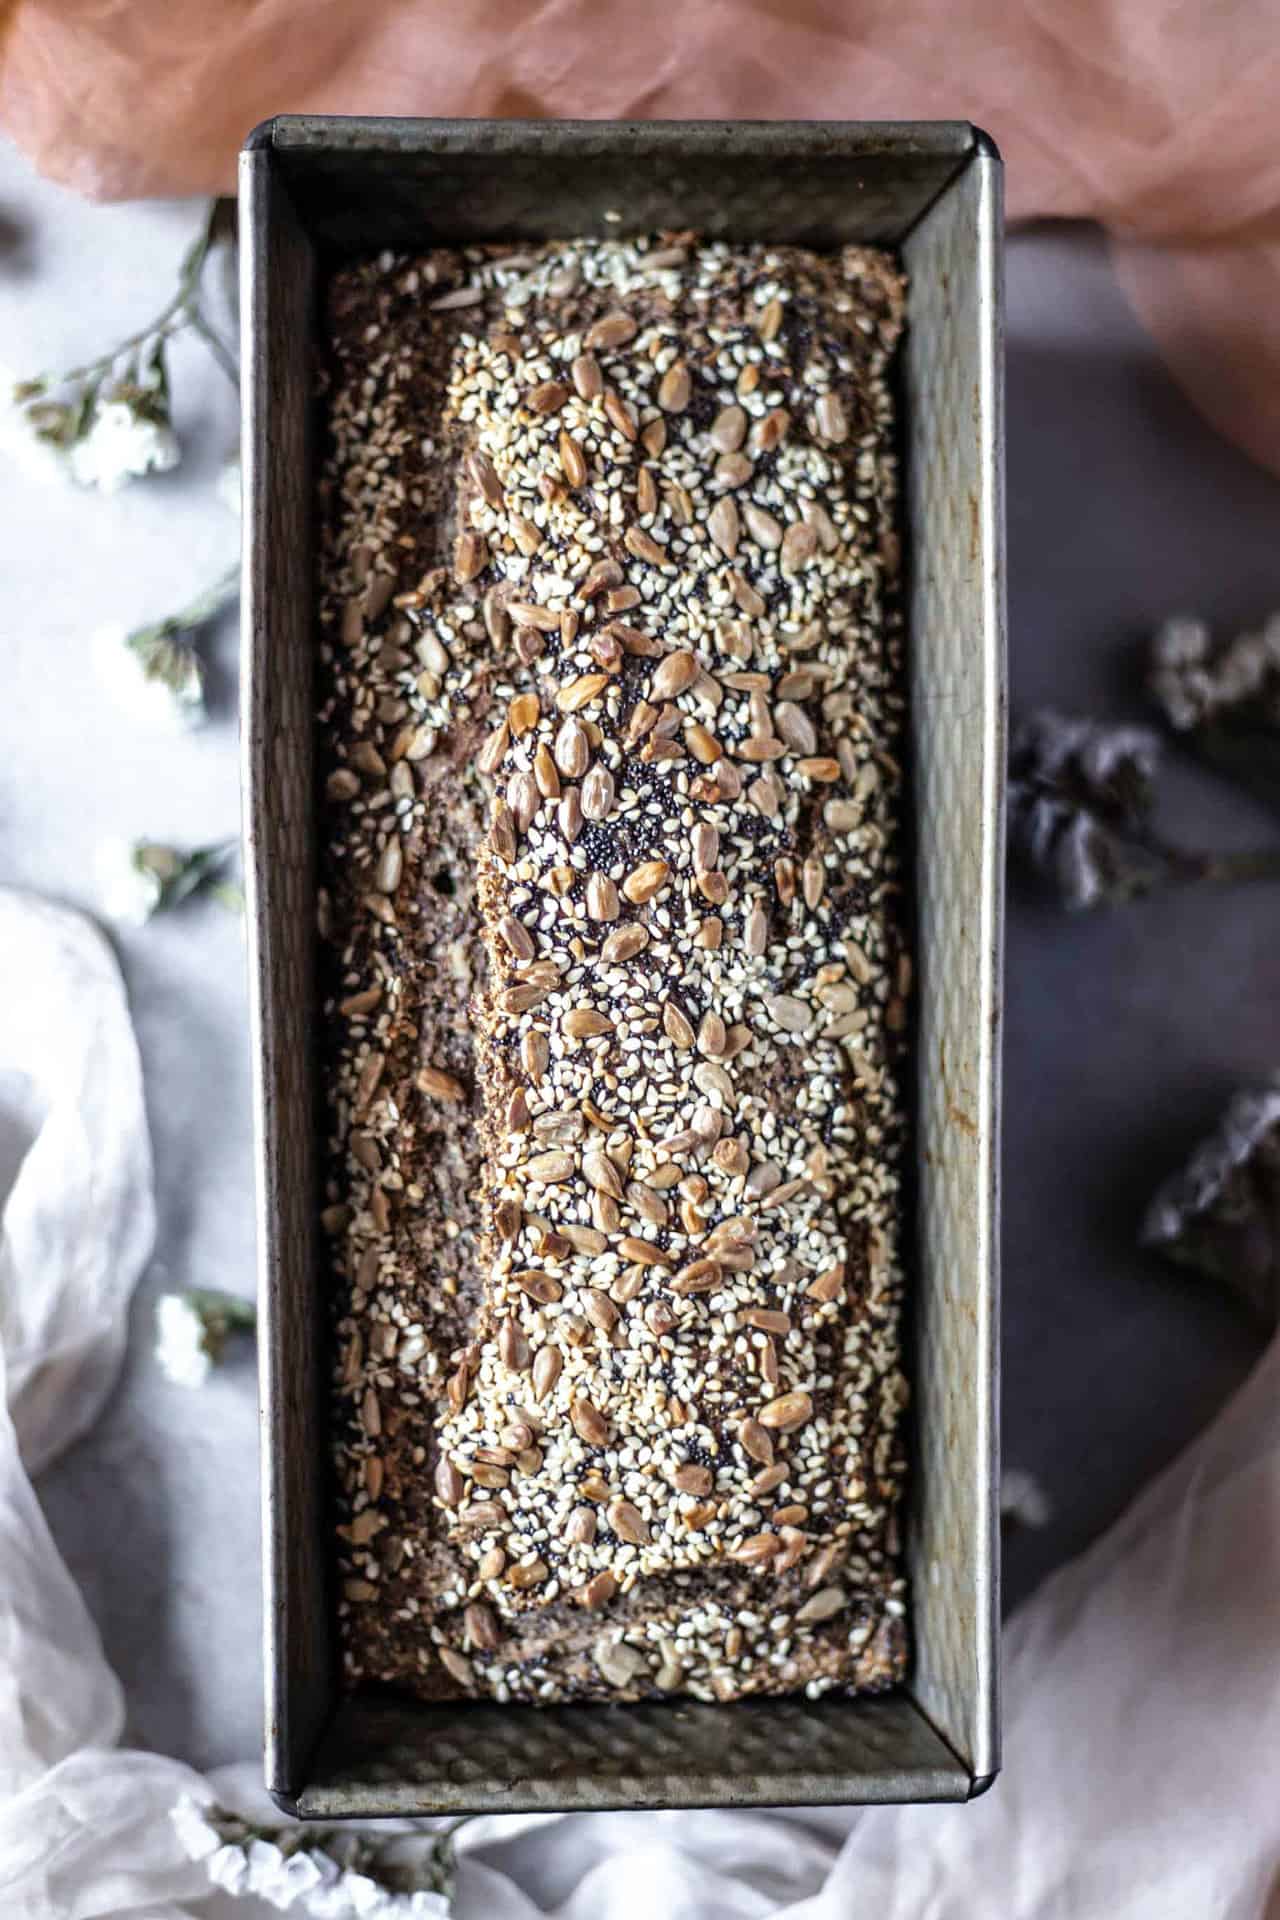 This gluten-free superfood bread is rich, wholesome, nutty, flavorful with a wonderfully soft texture. It's perfect for breakfast or mid-day snack.